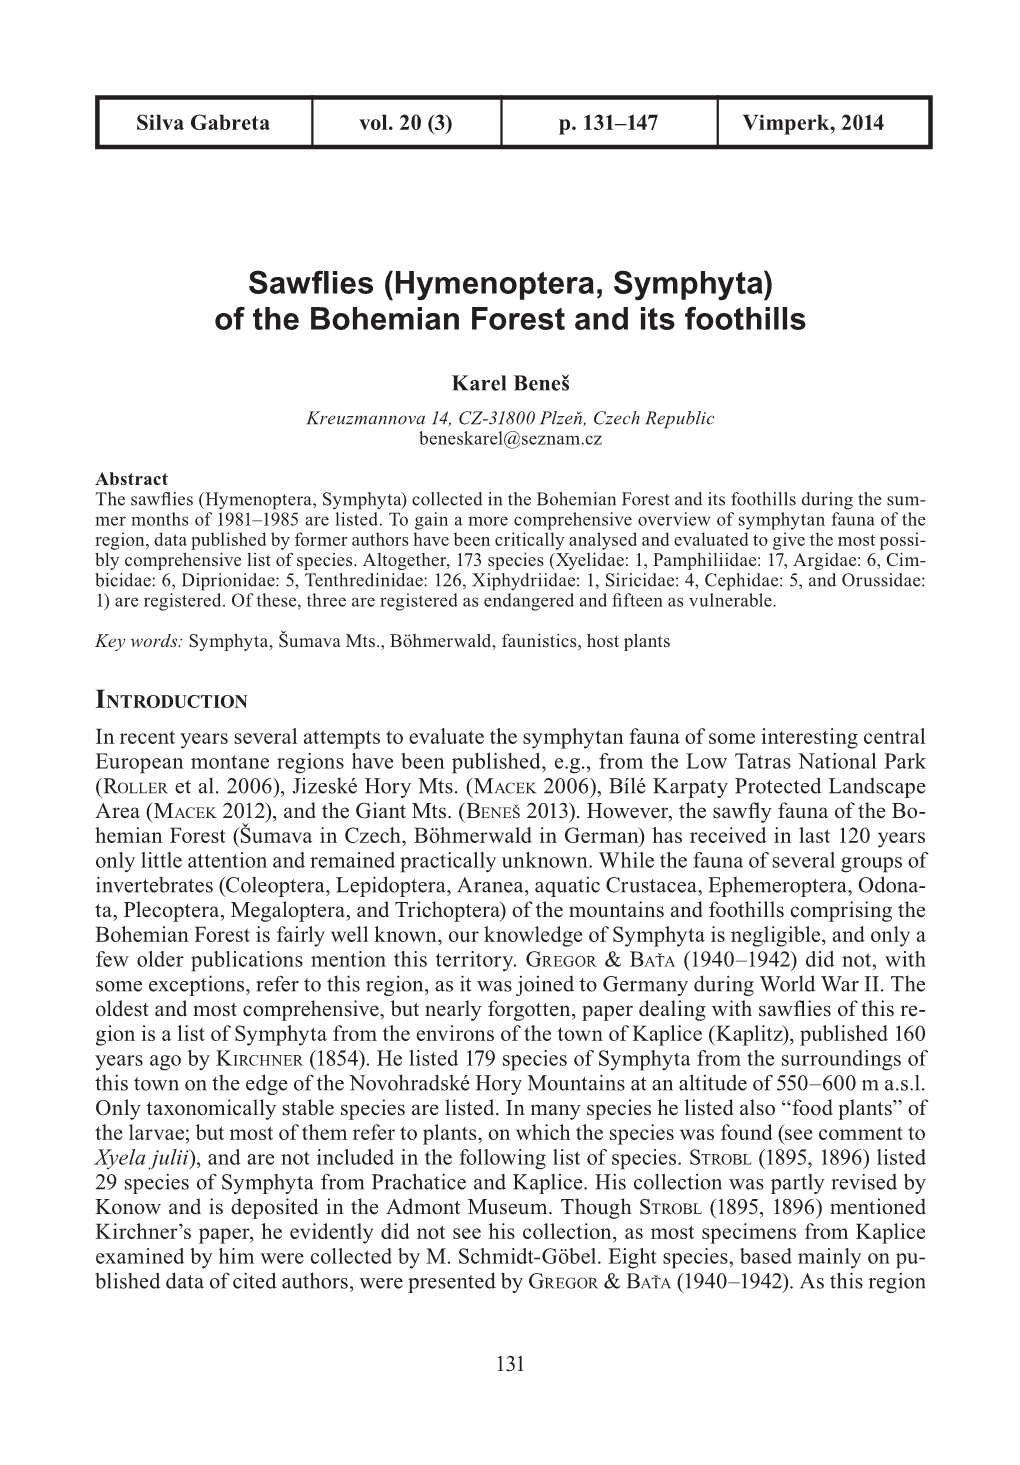 Sawflies (Hymenoptera, Symphyta) of the Bohemian Forest and Its Foothills